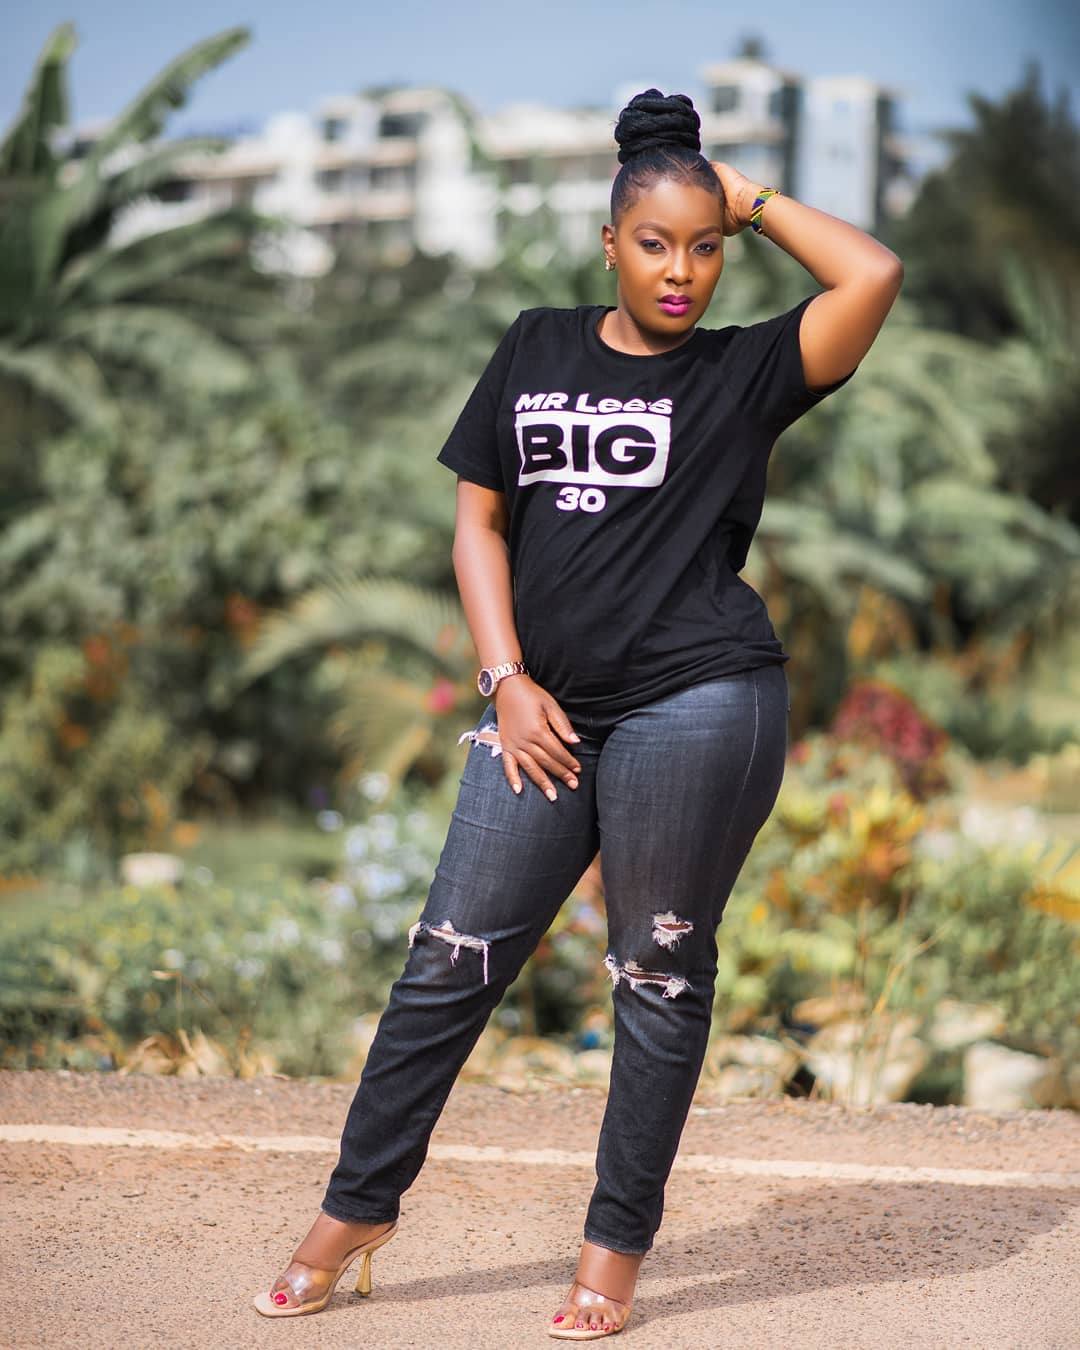 Wedding Bells? Ebonies group girl Evelyn Namulondo hints at making it official with boo.